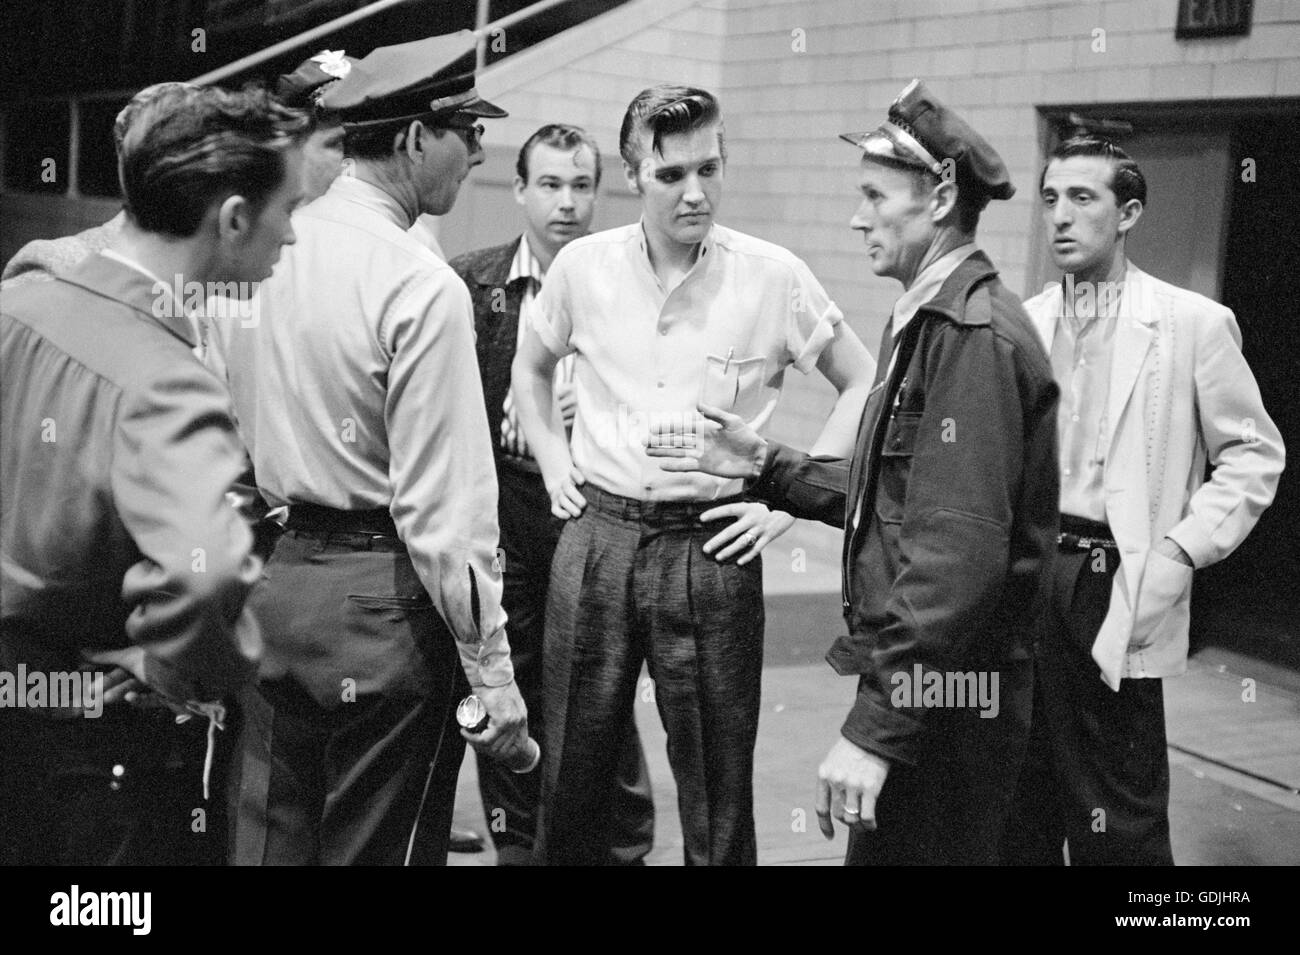 Elvis Presley and bandmates speaking with police officers prior to a performance Stock Photo